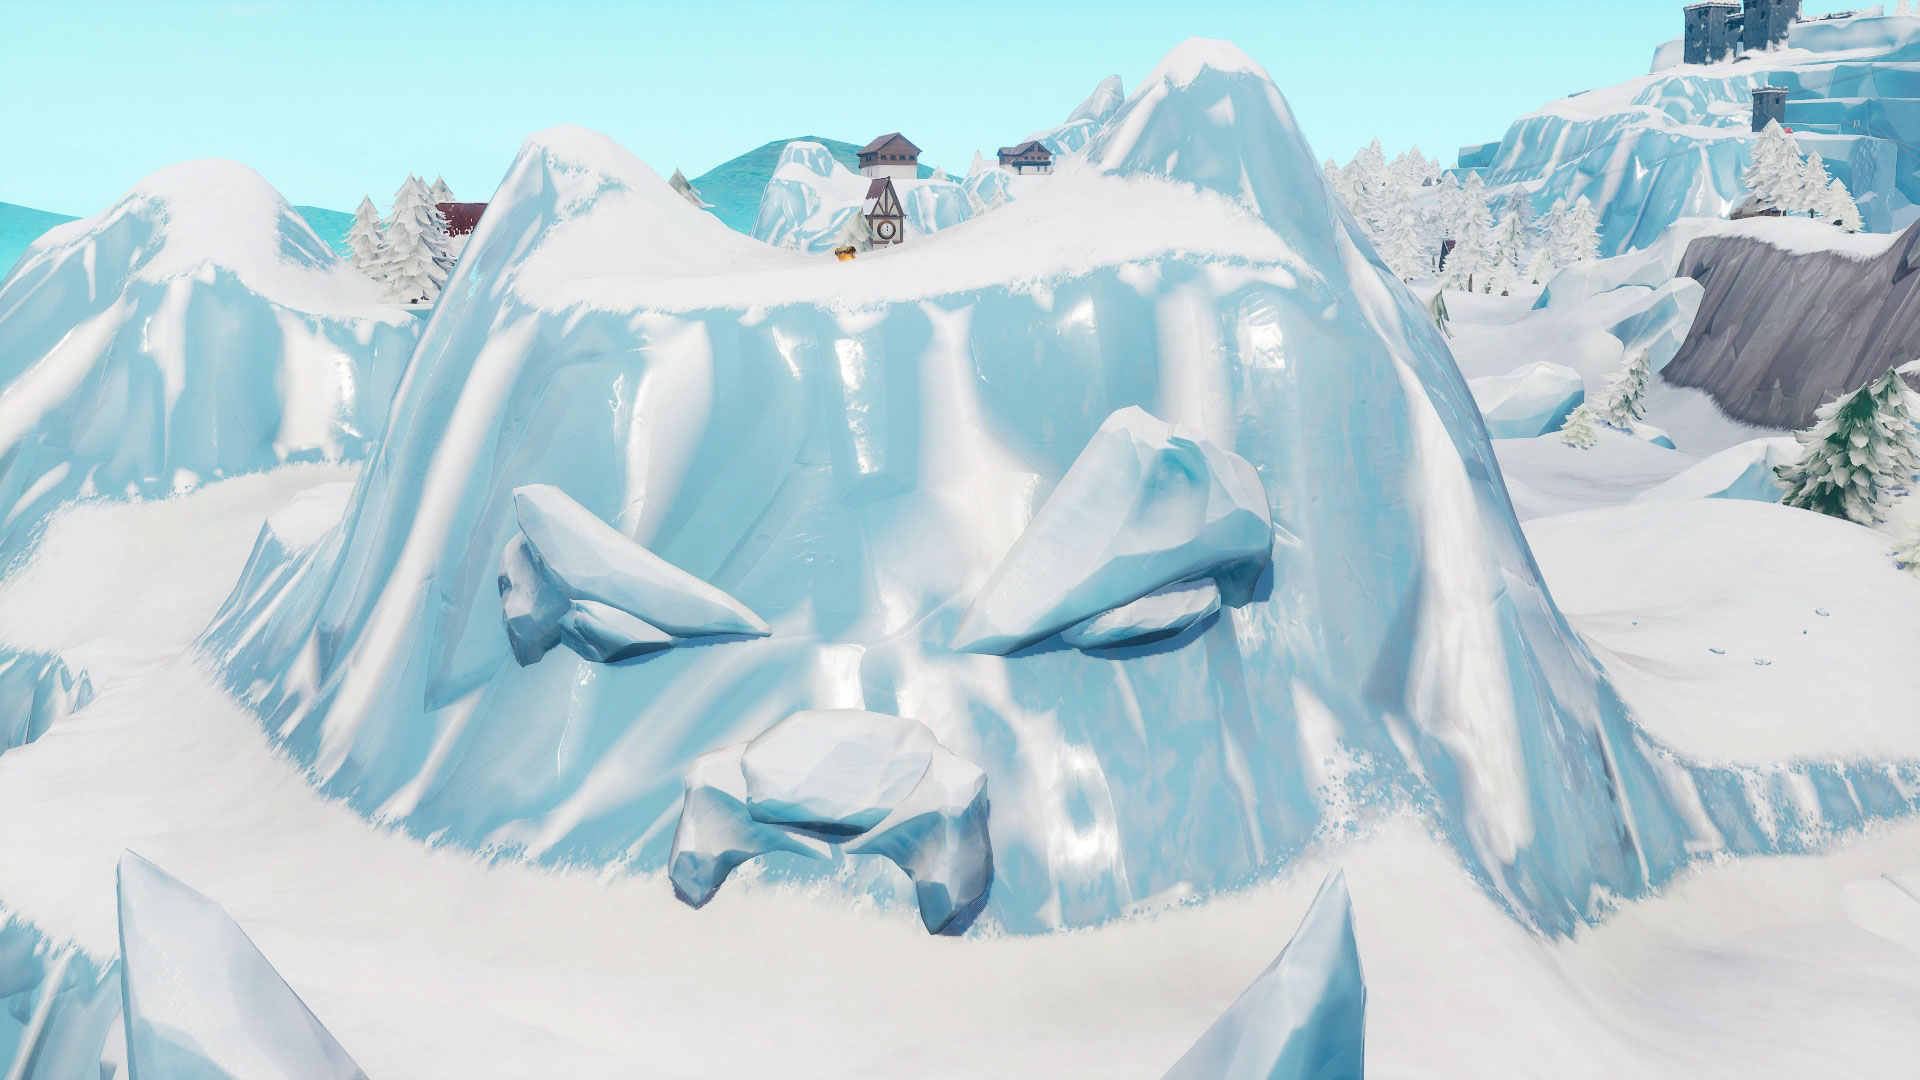 Face In The Ice Fortnite Where To Visit A Giant Face In The Desert The Jungle And The Snow In Fortnite Season 8 Week 1 Challenge Gamesradar